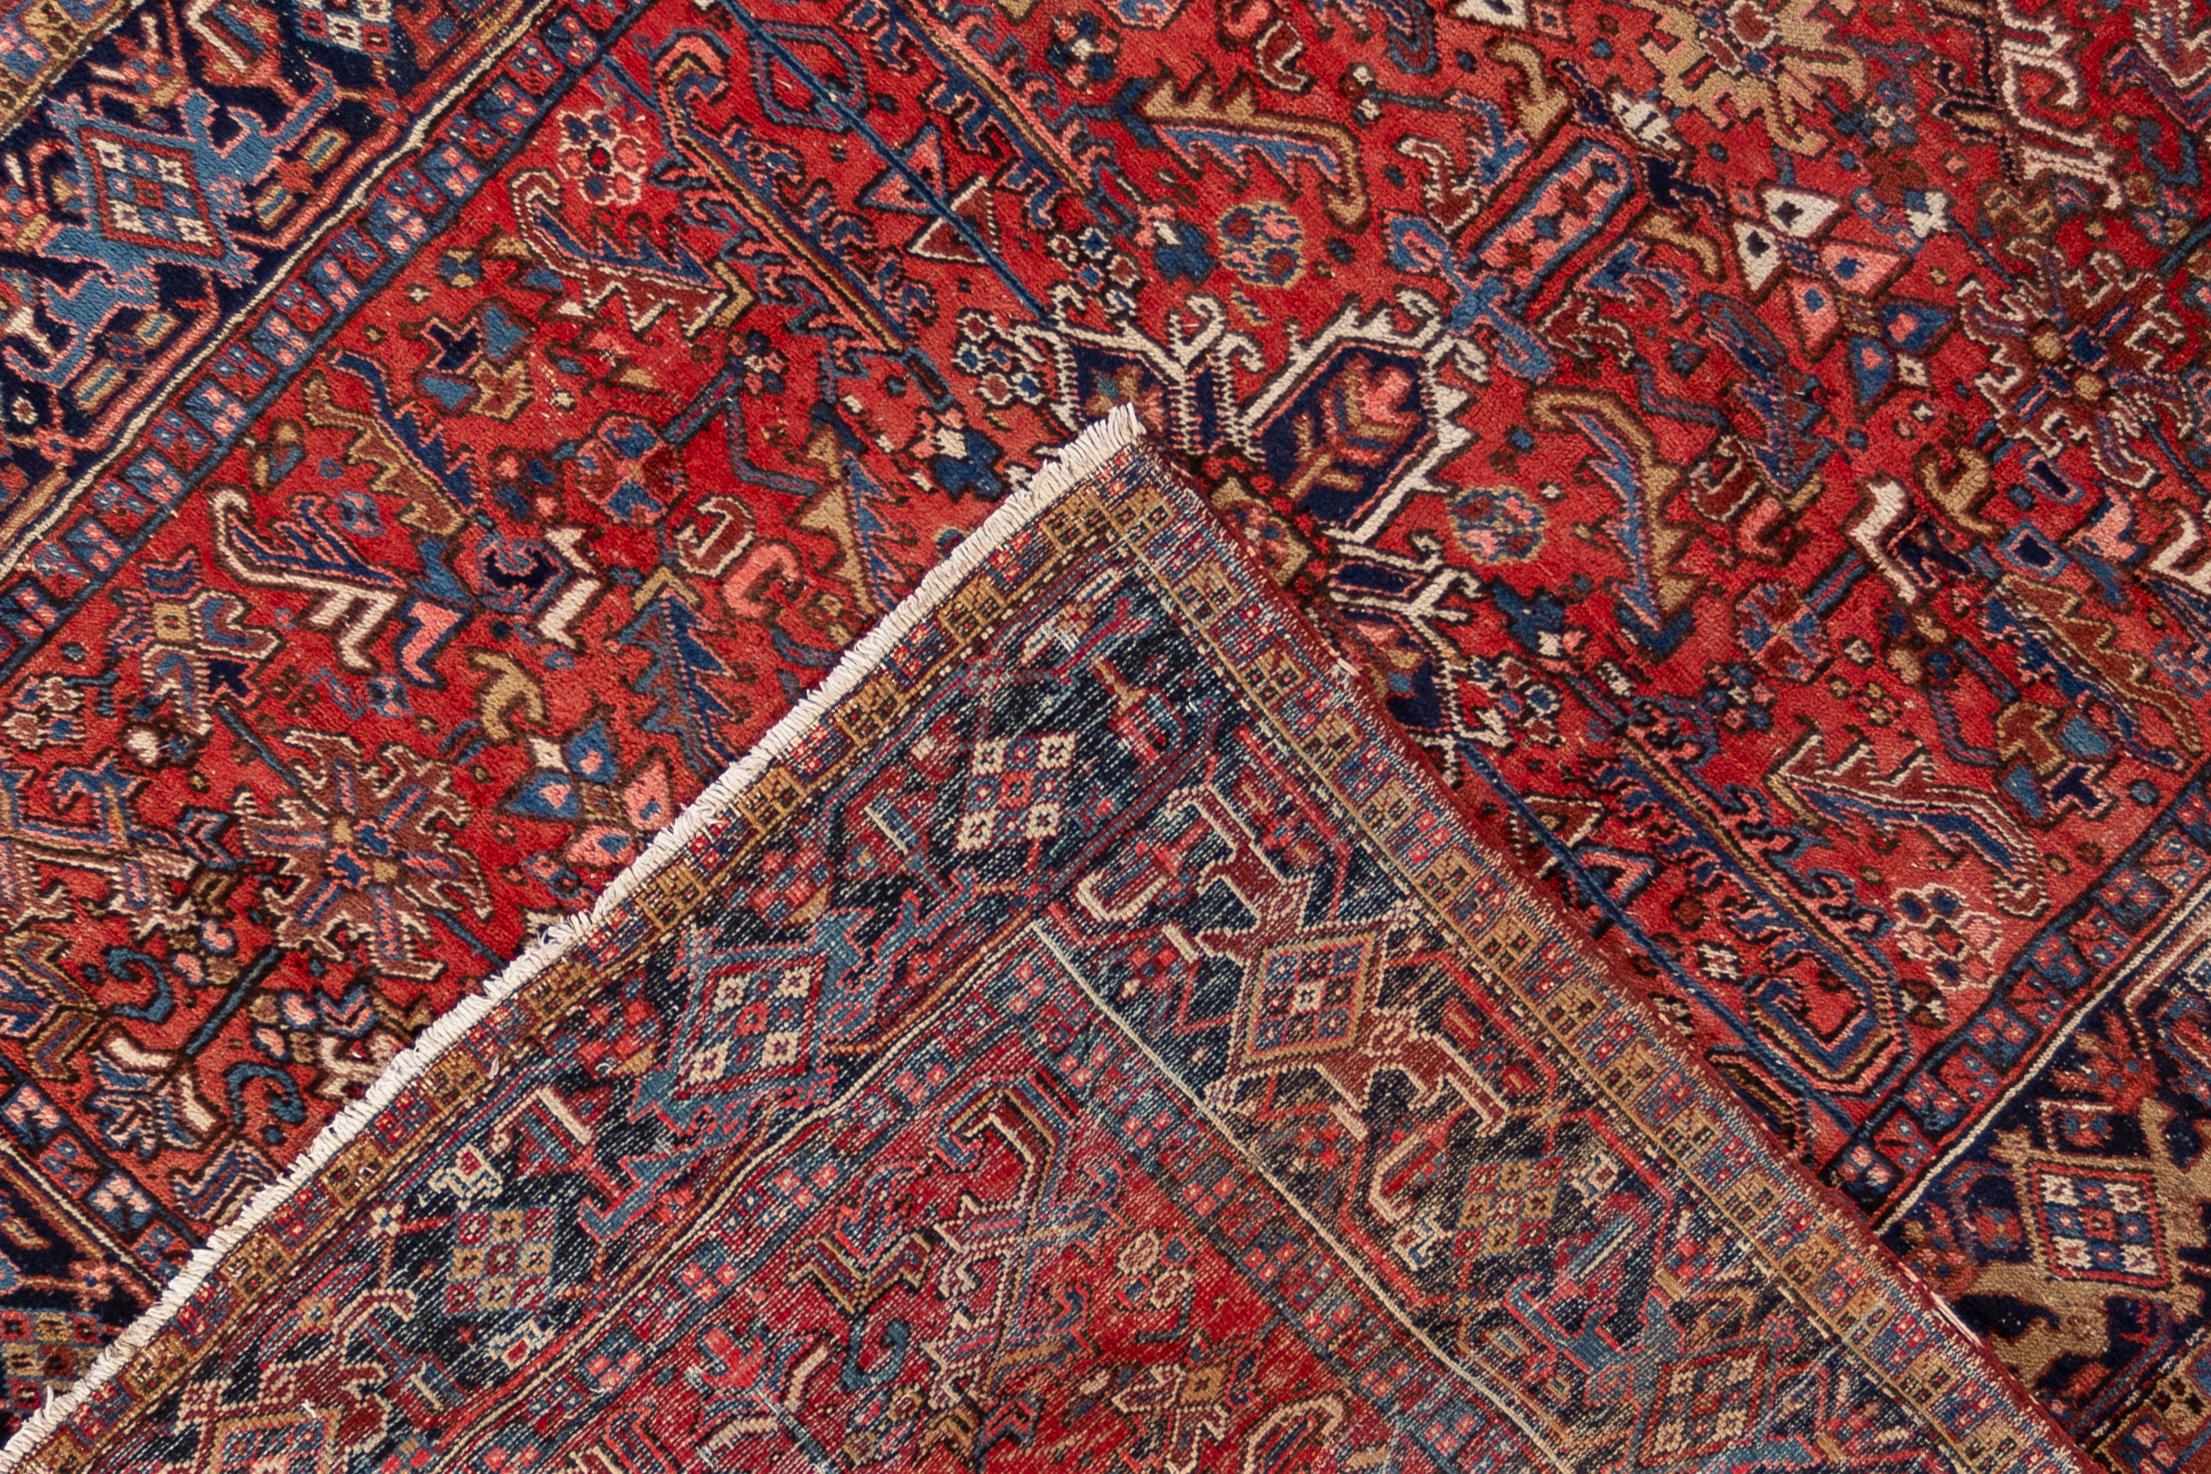 An early 20th century Square antique Heriz rug with an all over red motif and centre medallion. This rug measures at 7'7